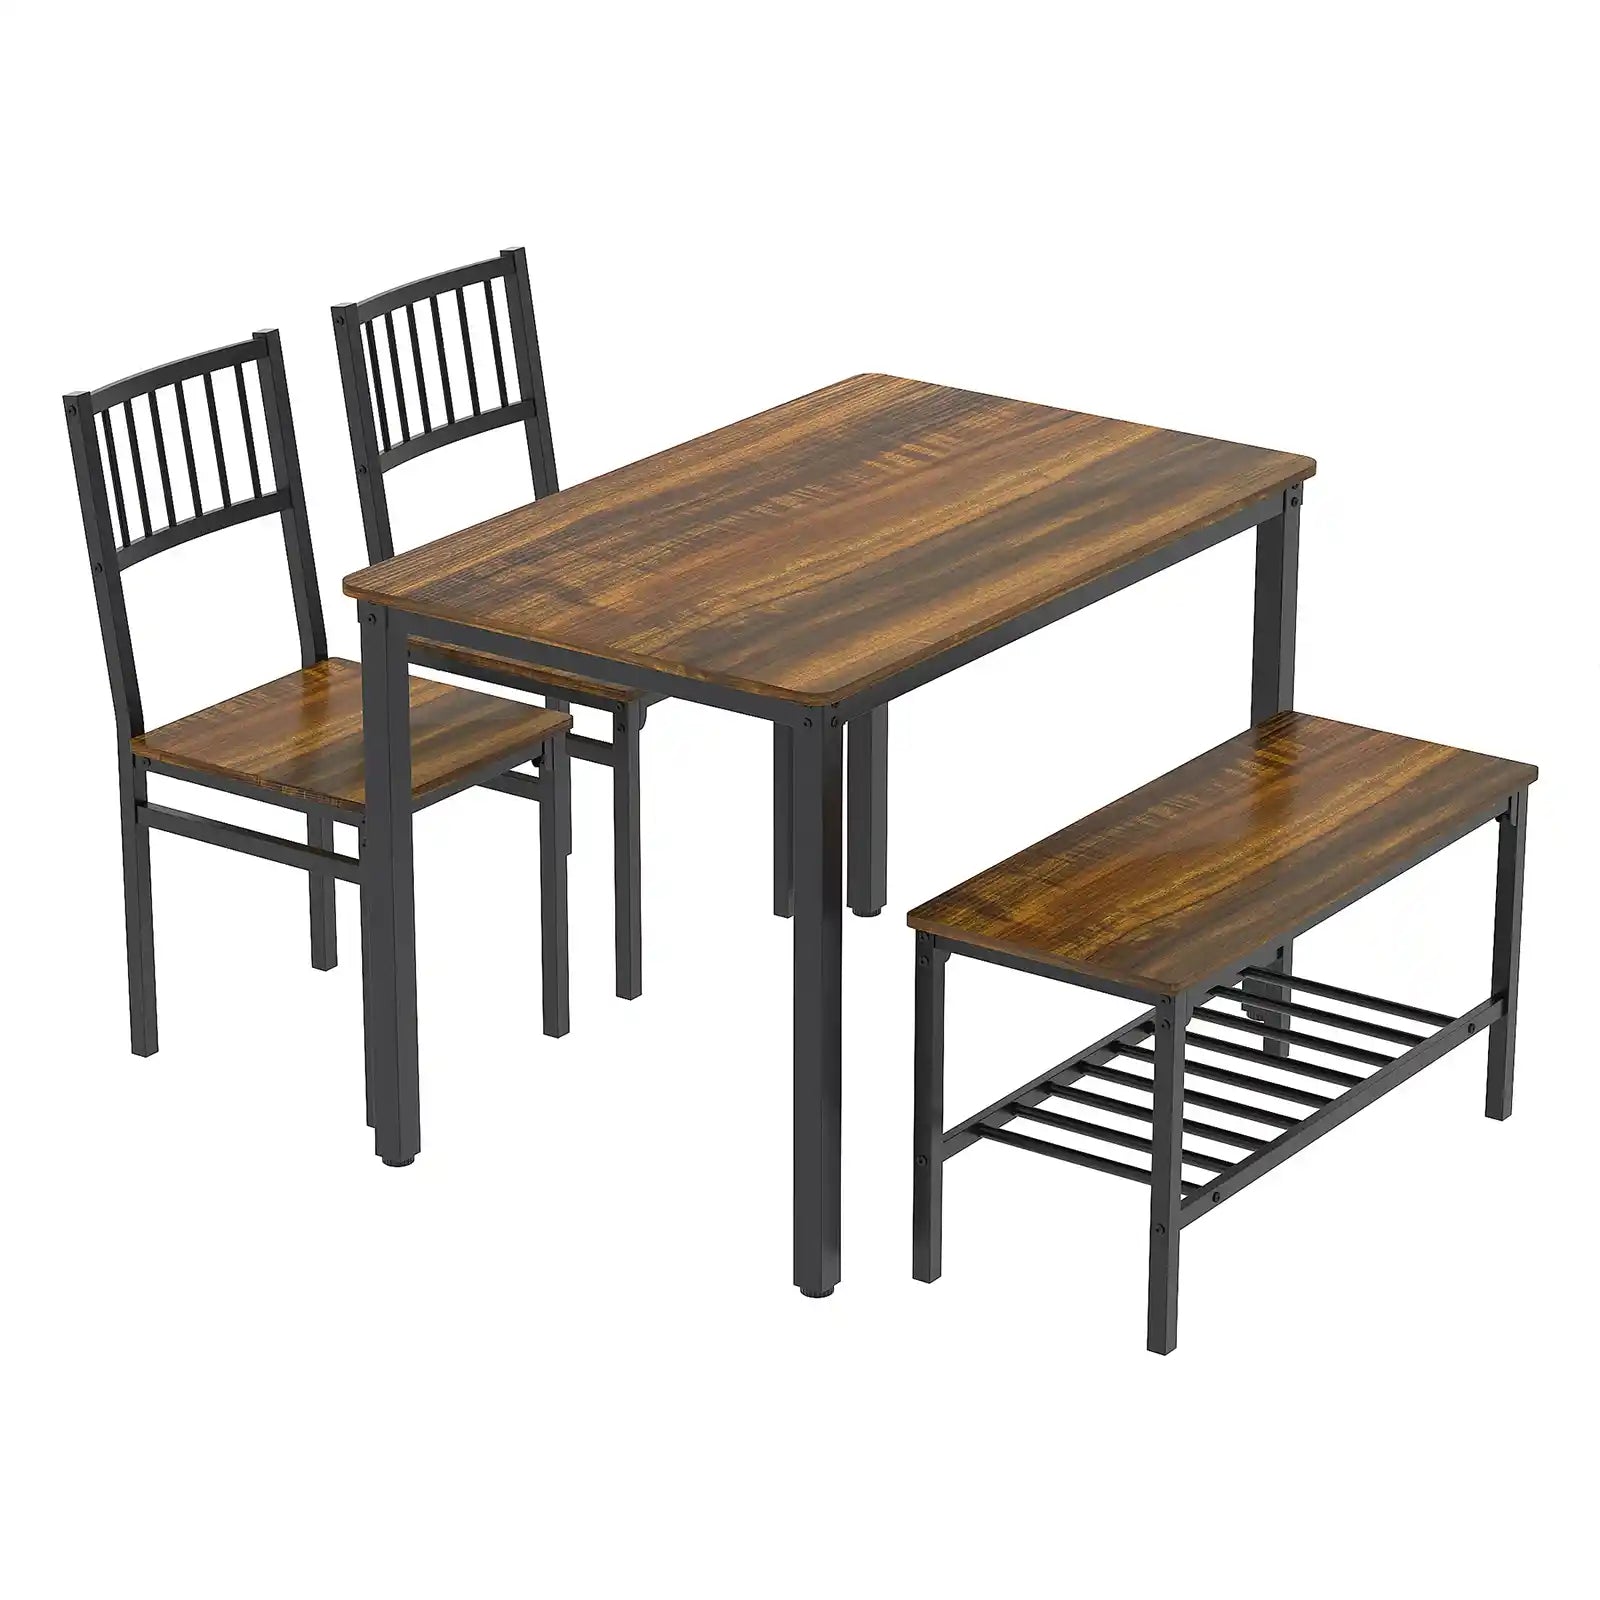 Rectangular Dining Table Set with 2 Chairs and a Bench